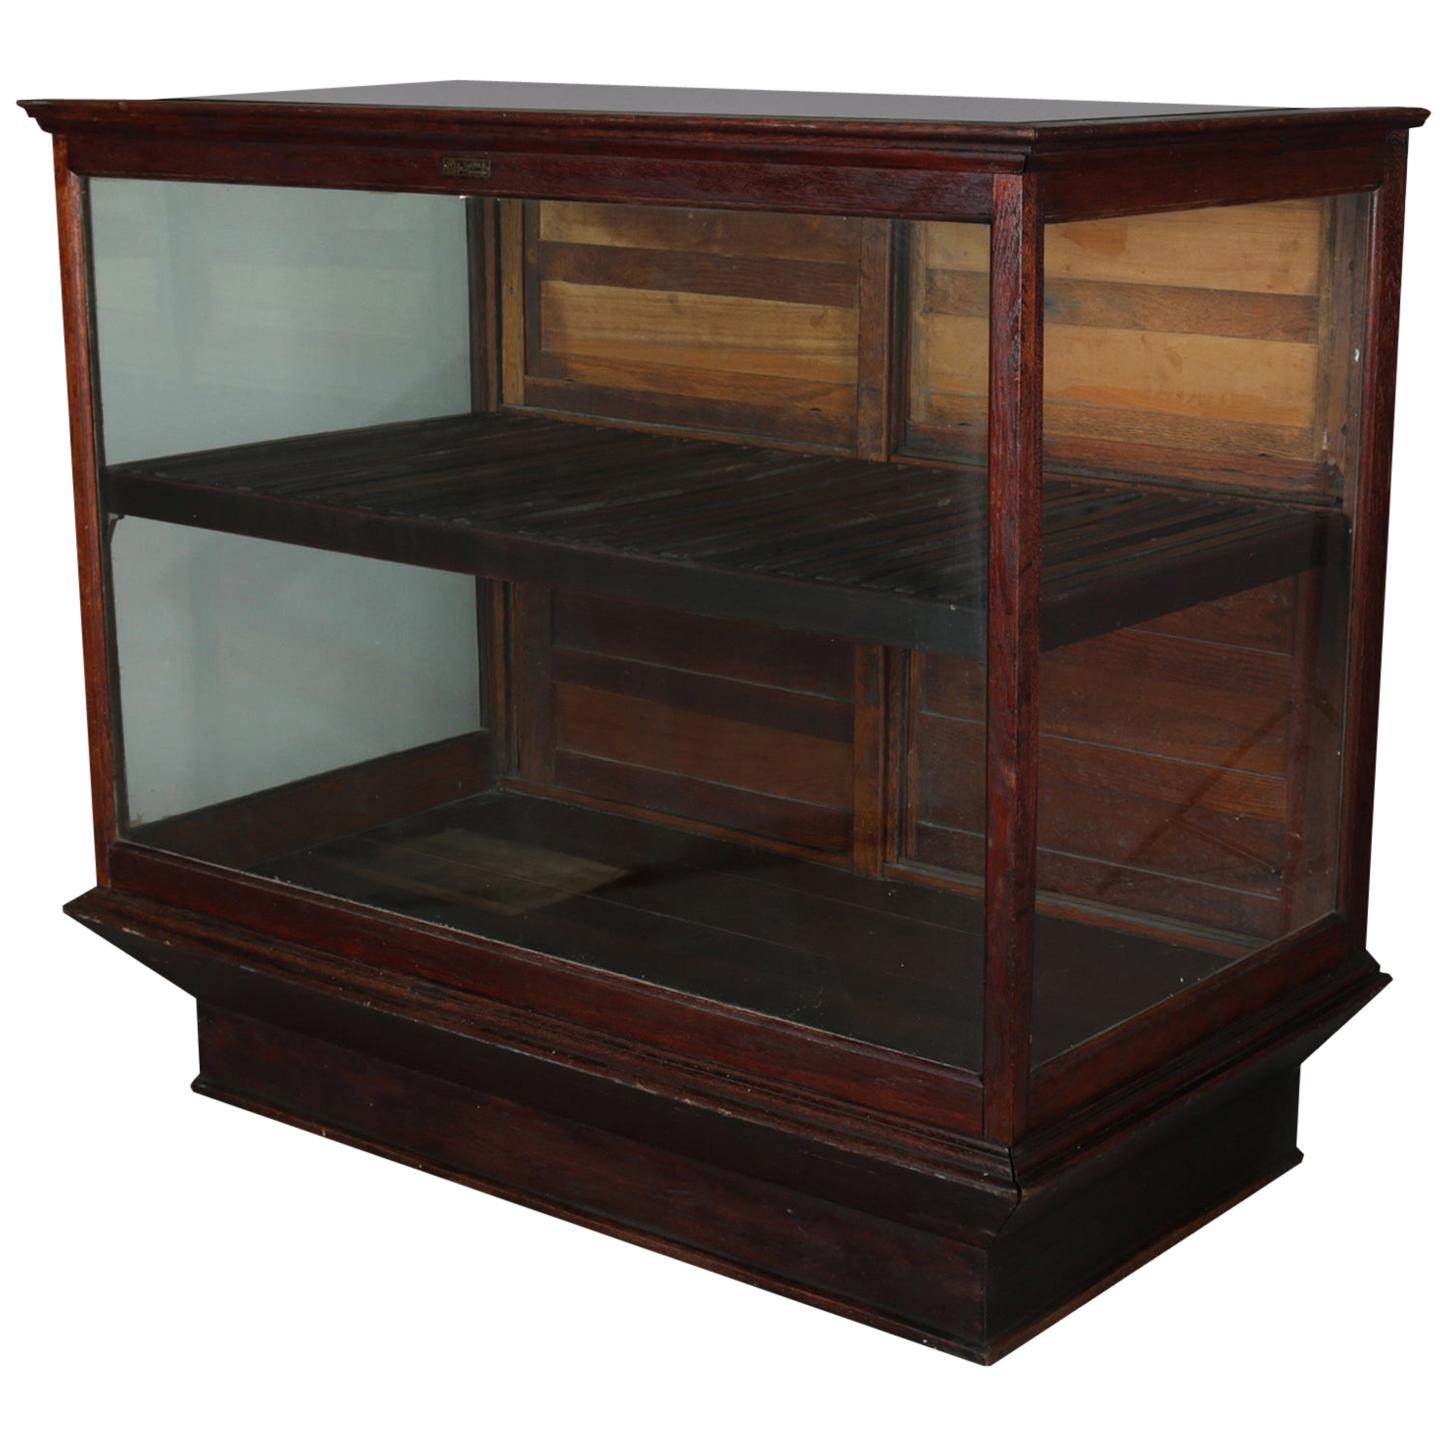 Antique Oak and Glass Country Store Display Cabinet by Sun Mfg. Co., circa 1900